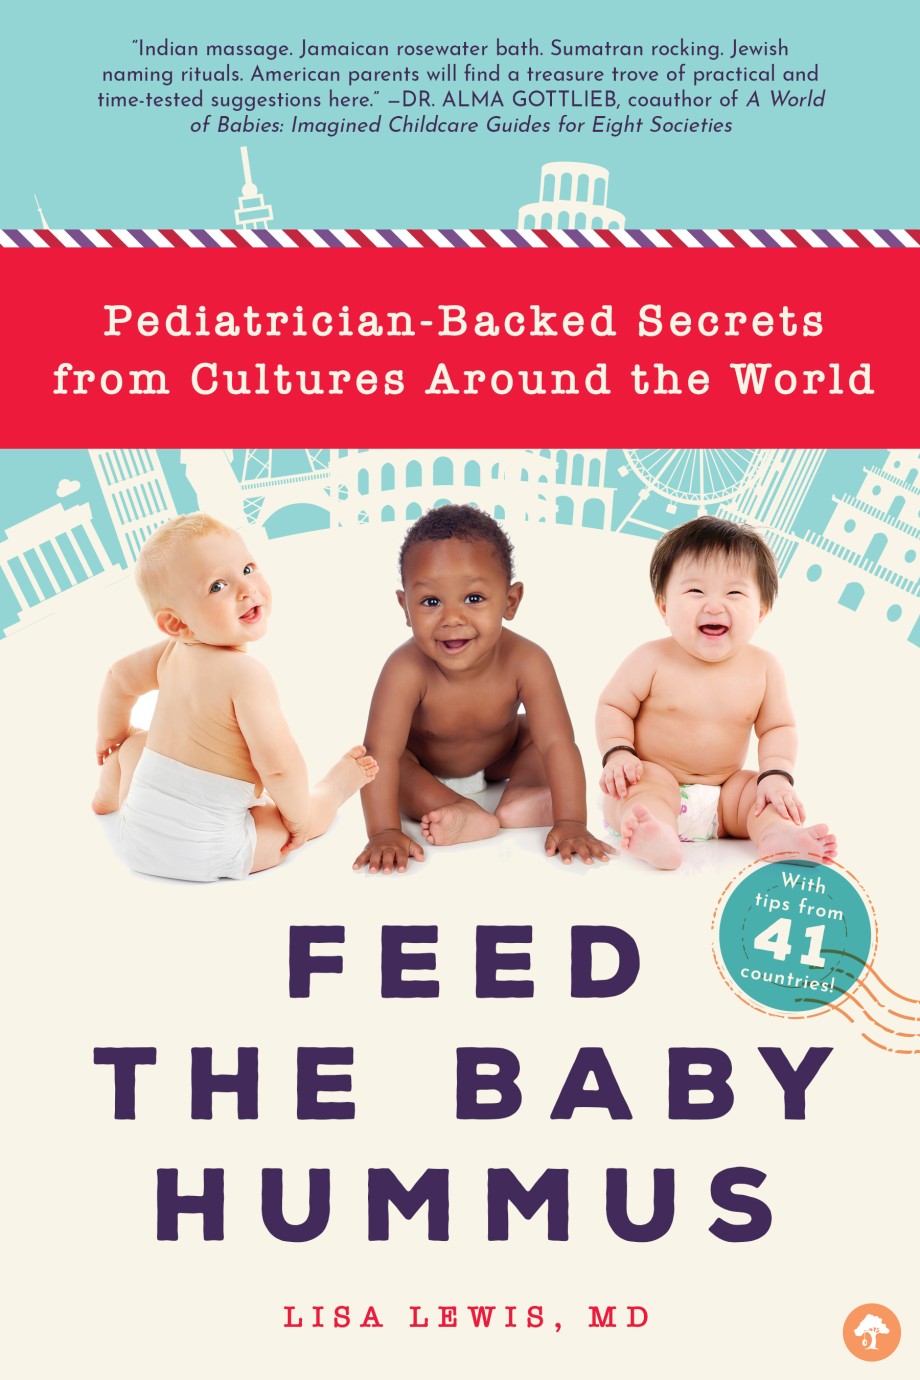 Feed the Baby Hummus Pediatrician-Backed Secrets from Cultures Around the World